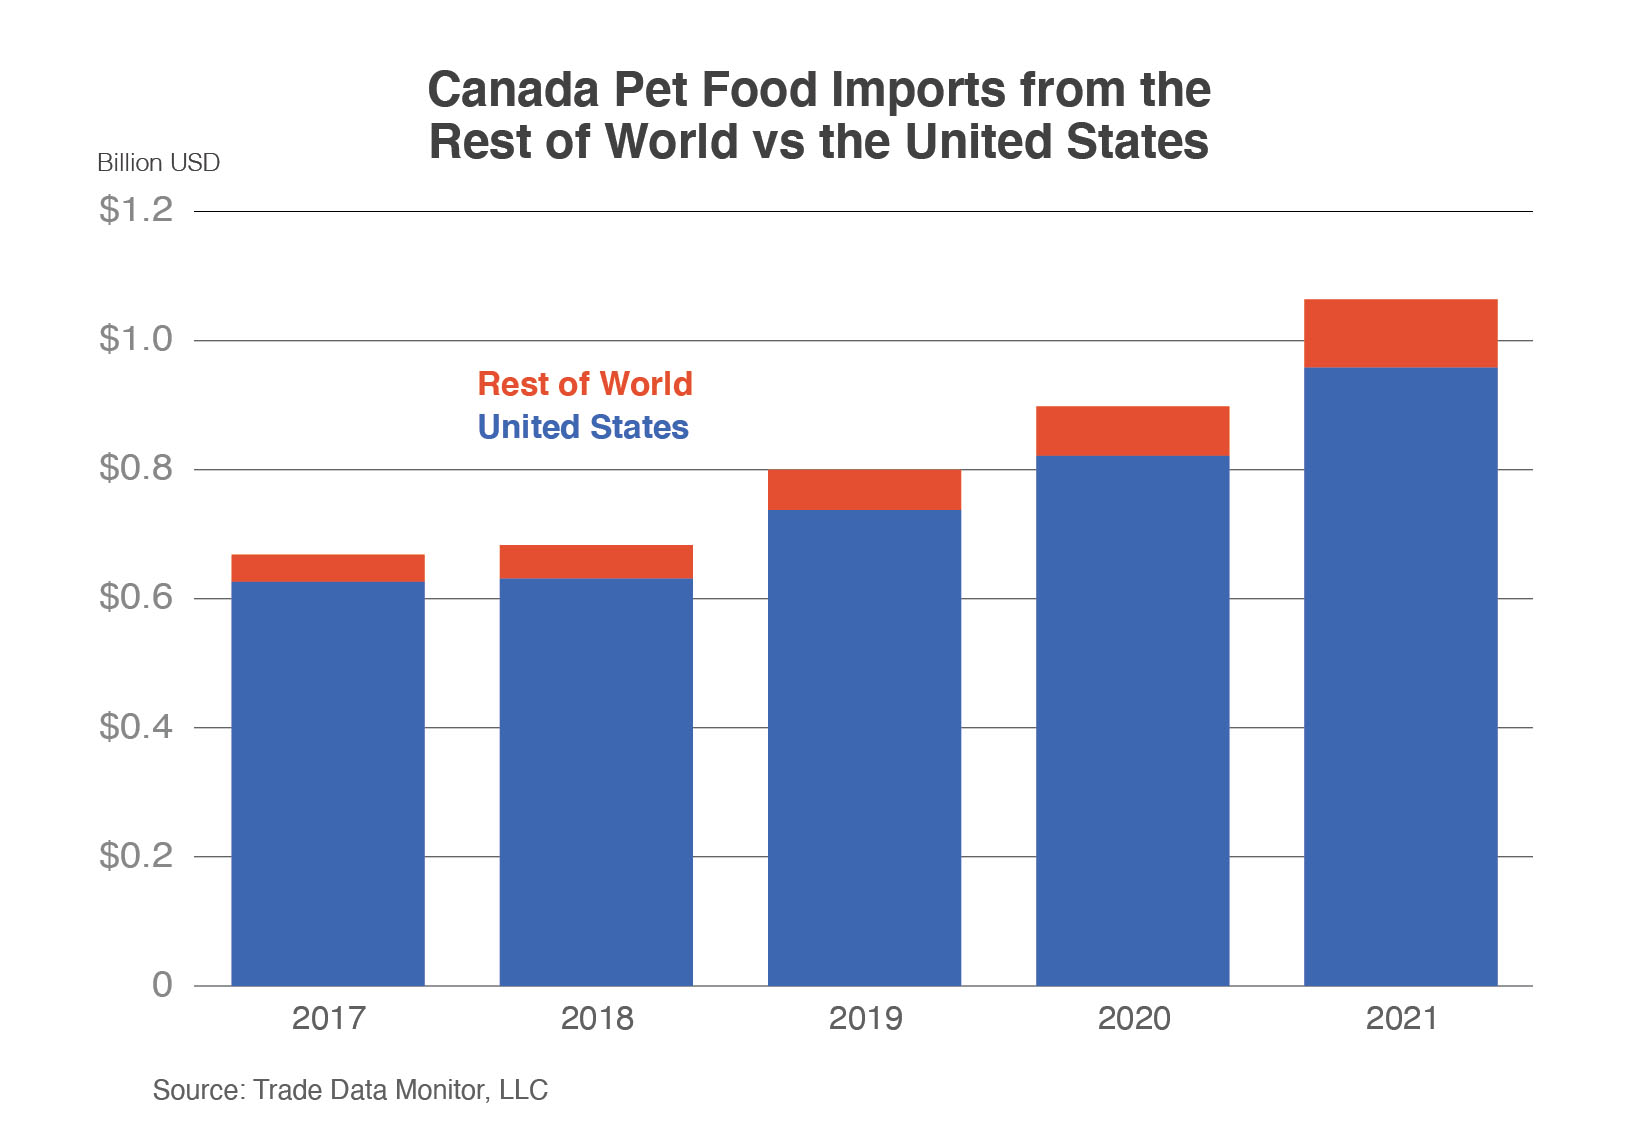 Canada pet food exports from the rest of the world versus the United States, according to Trade Data Monitor